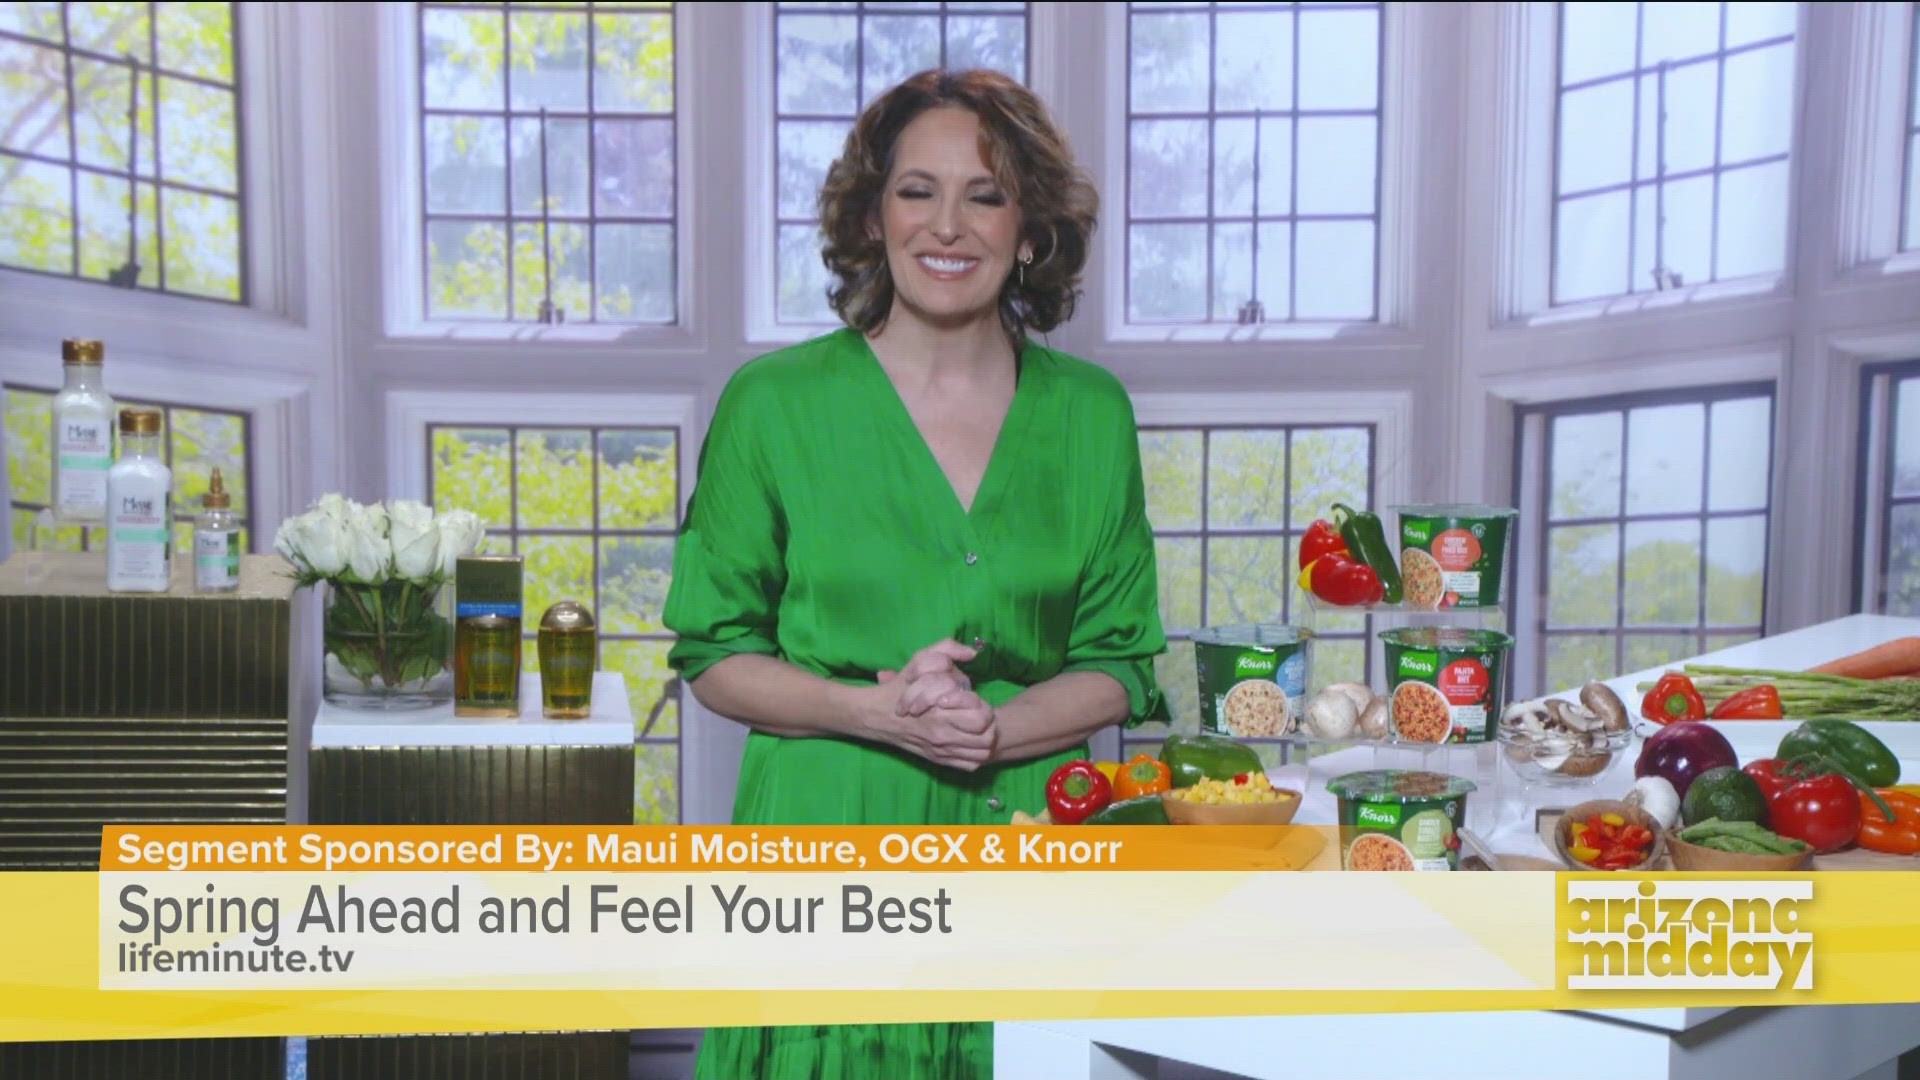 Joann Butler gives us the must-haves for looking and feeling your best during this crazy time of year from beauty and wellness routines to getting better sleep.